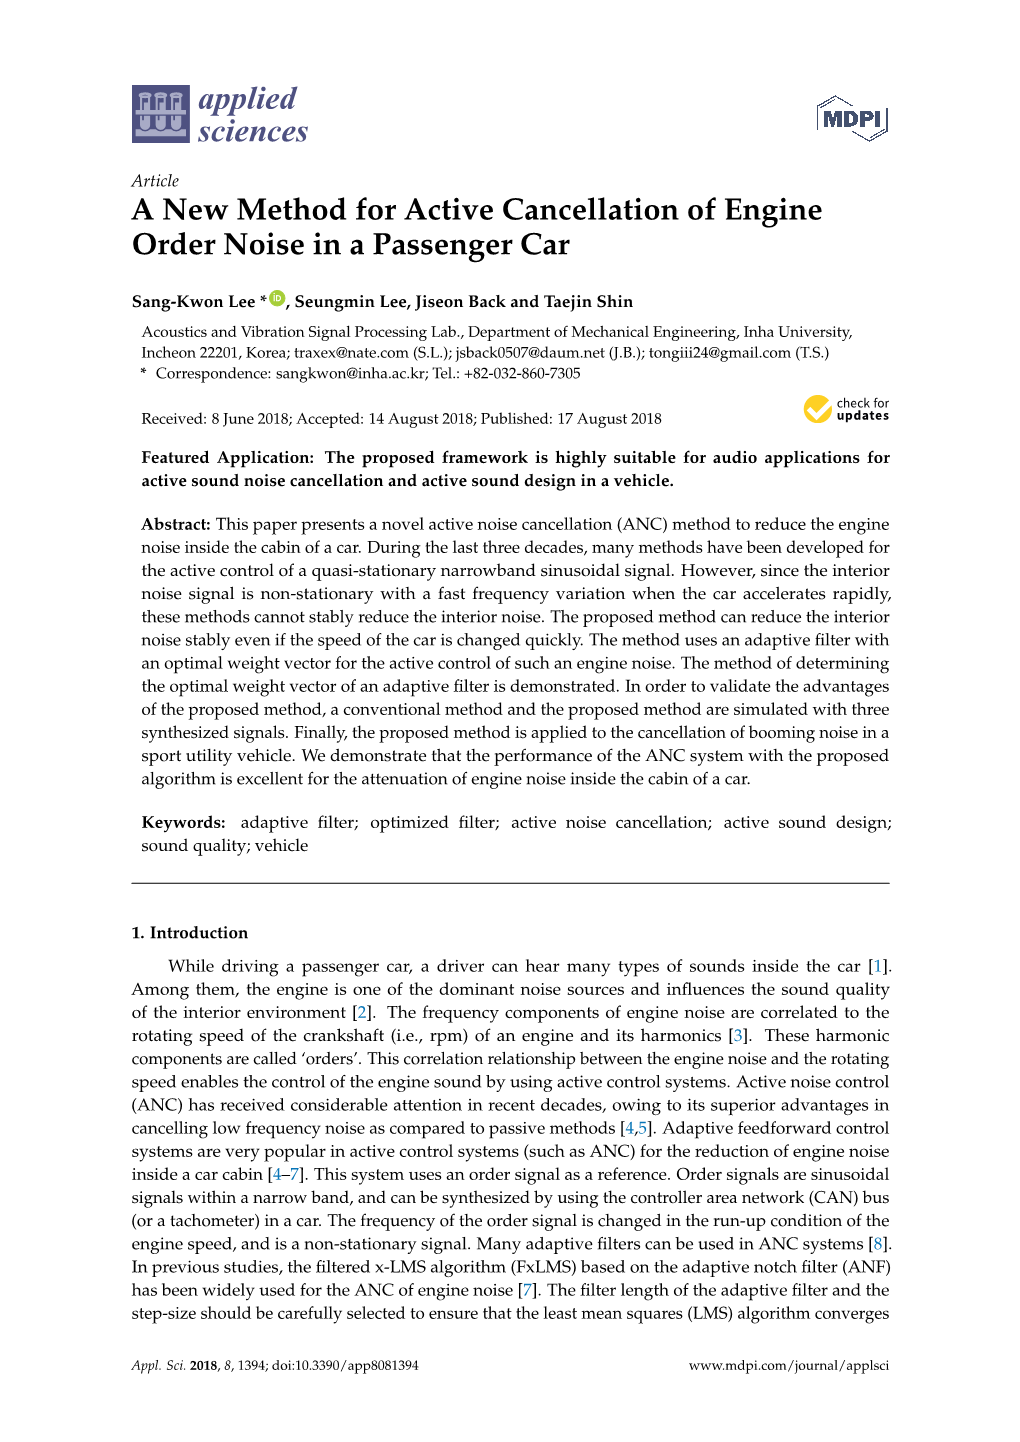 A New Method for Active Cancellation of Engine Order Noise in a Passenger Car